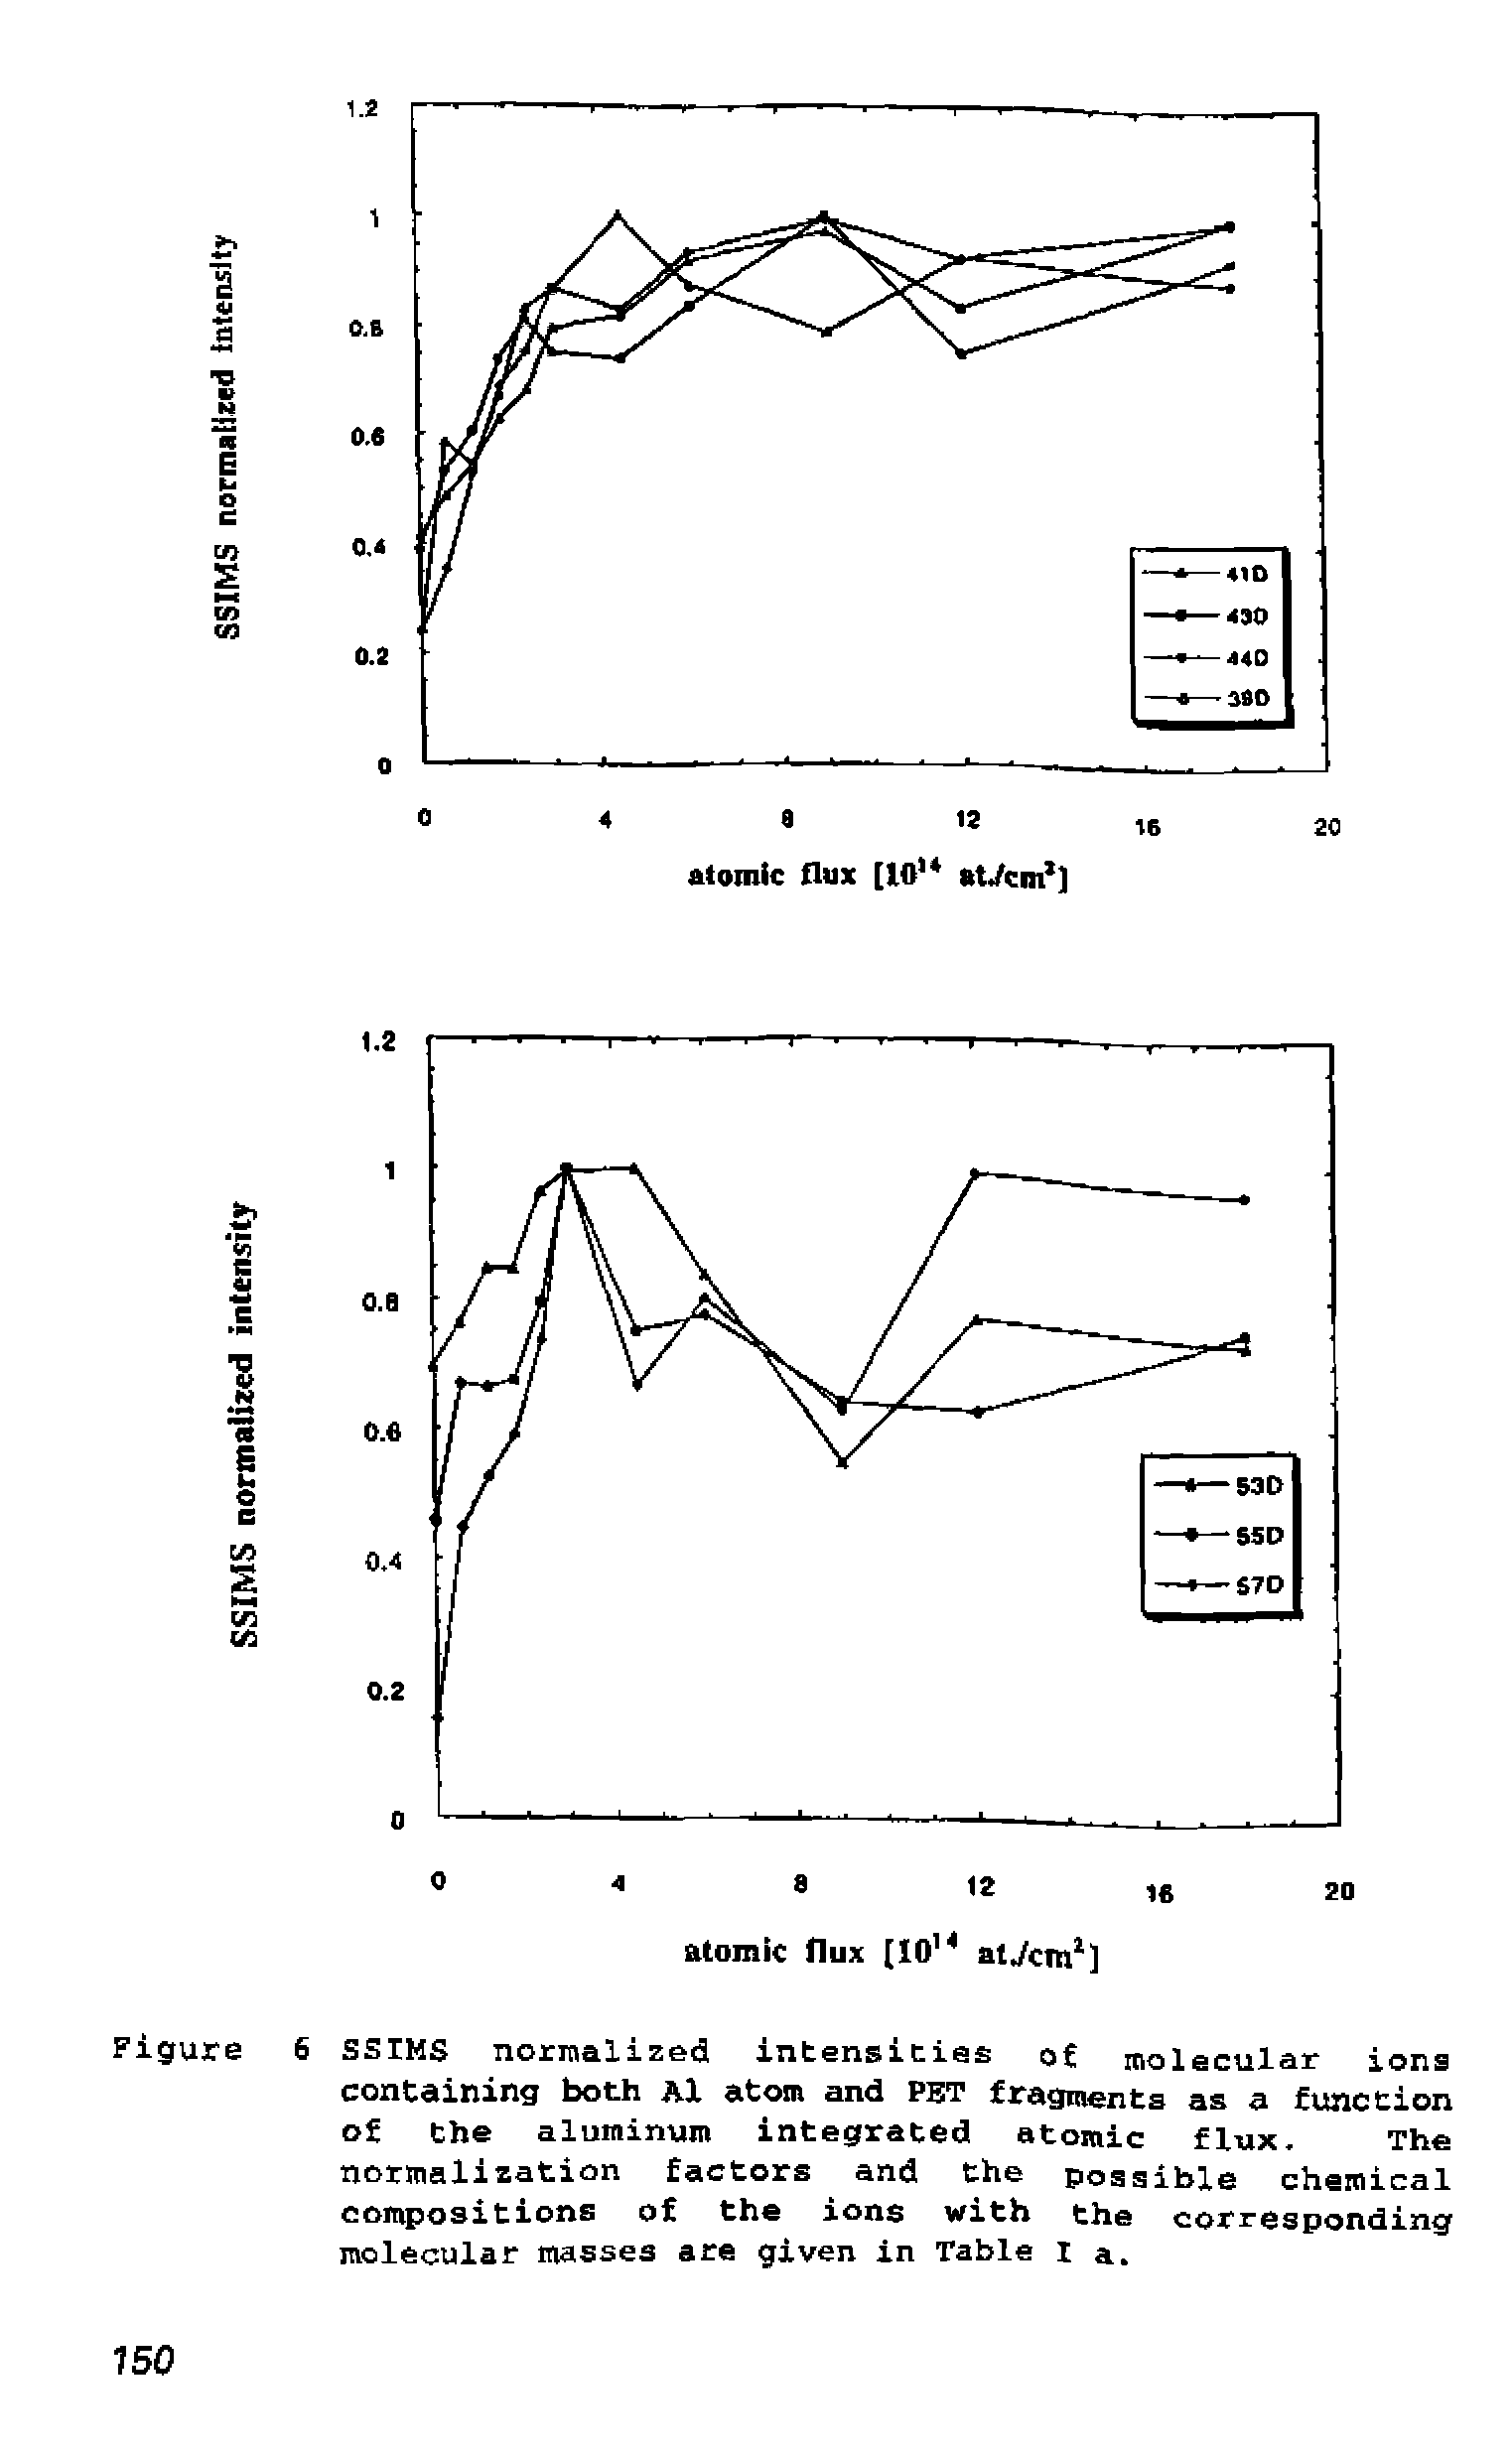 Figure 6 SSIMS normalized intensicias o molecular ions containing both a1 atom and pet fragments as a function of Che aluminum integrated atomic flux. The normalization factors and the possible chemical compositions of the ions with the corresponding molecular masses are given in Table l a.